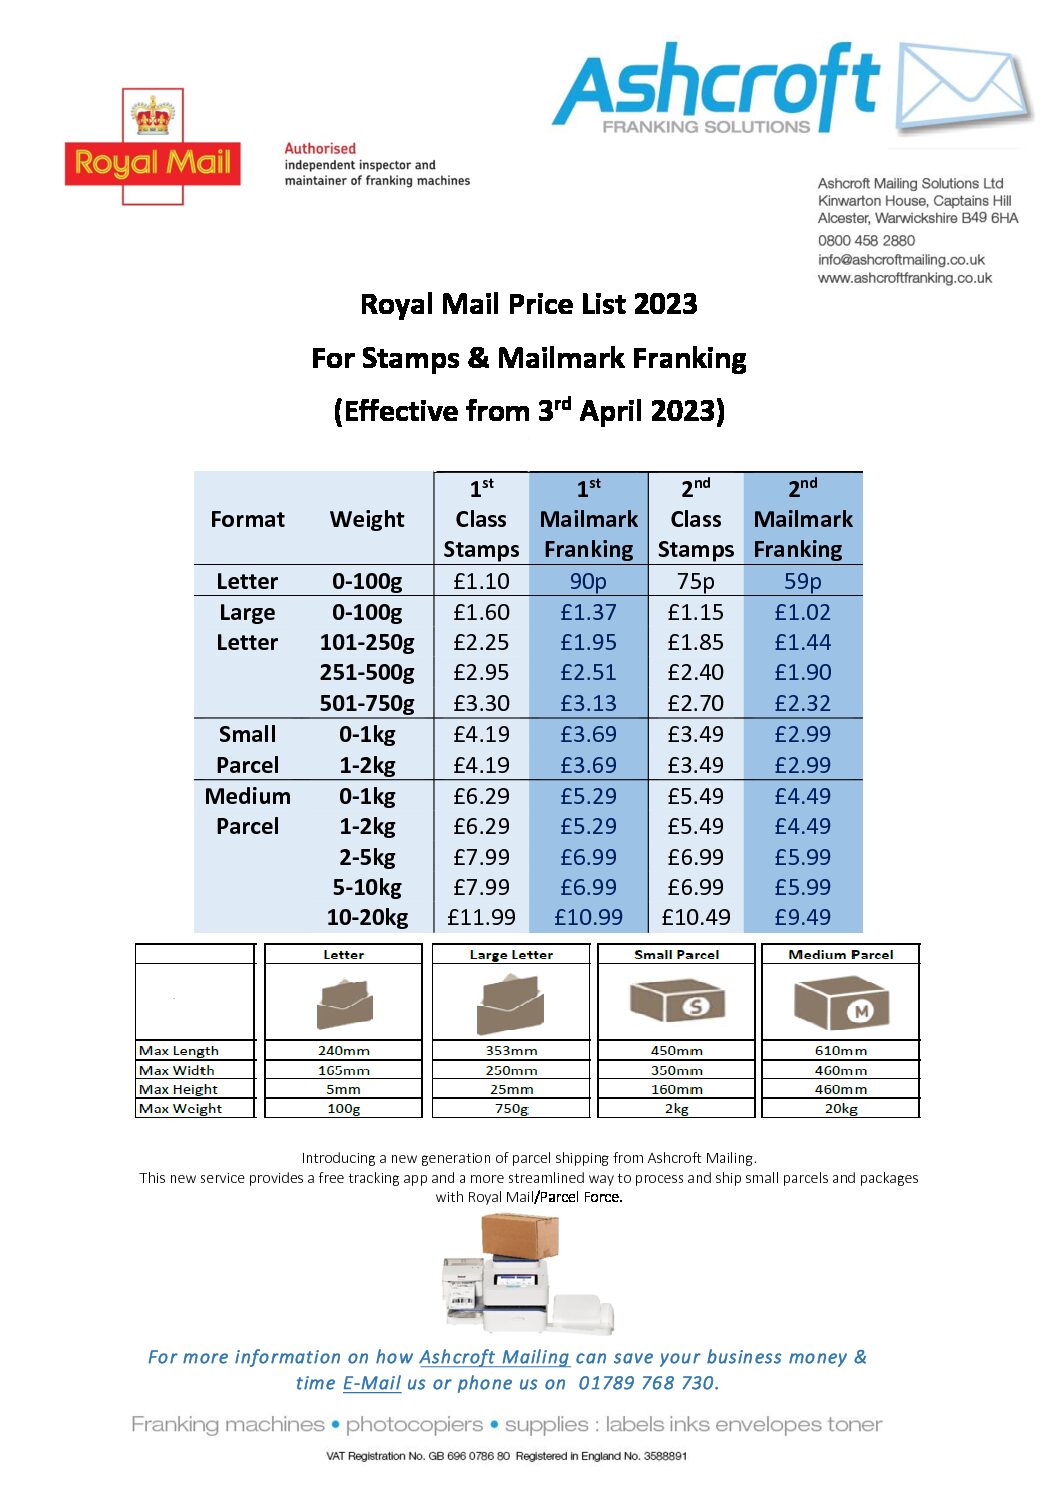 Royal Mail Price List for stamps and franking in 2023